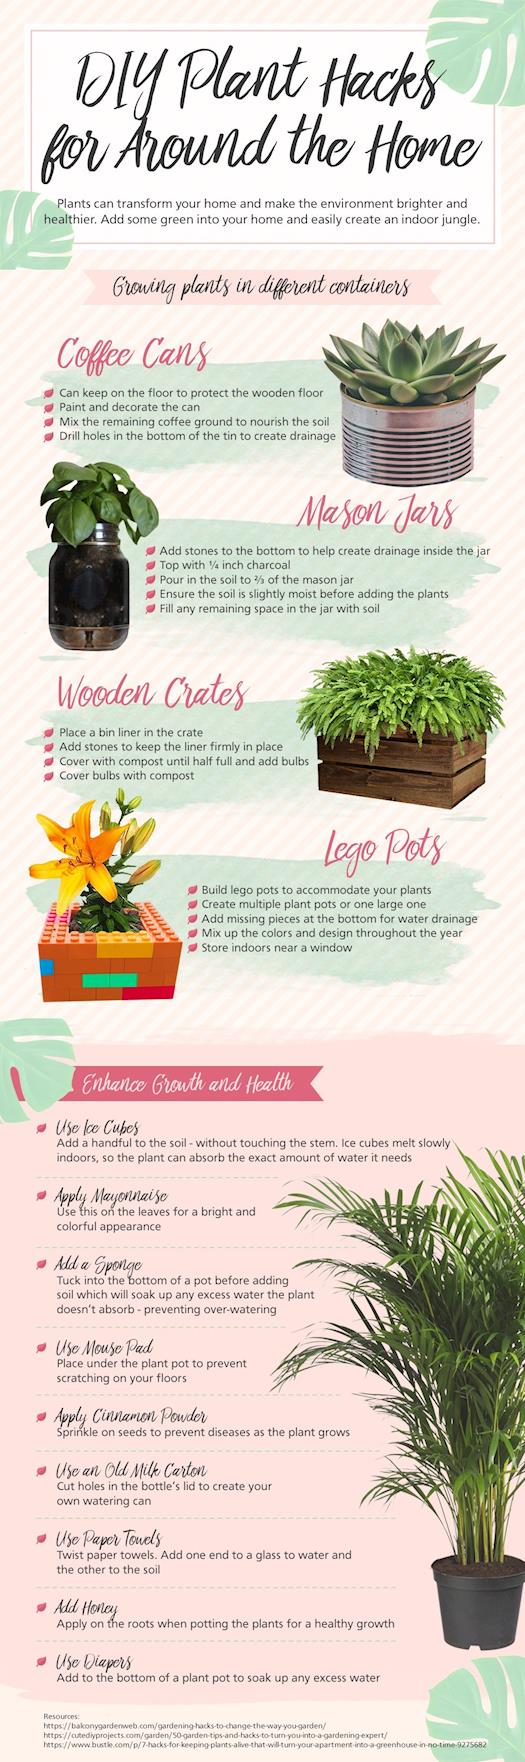 DIY Plant Hacks for Around the Home